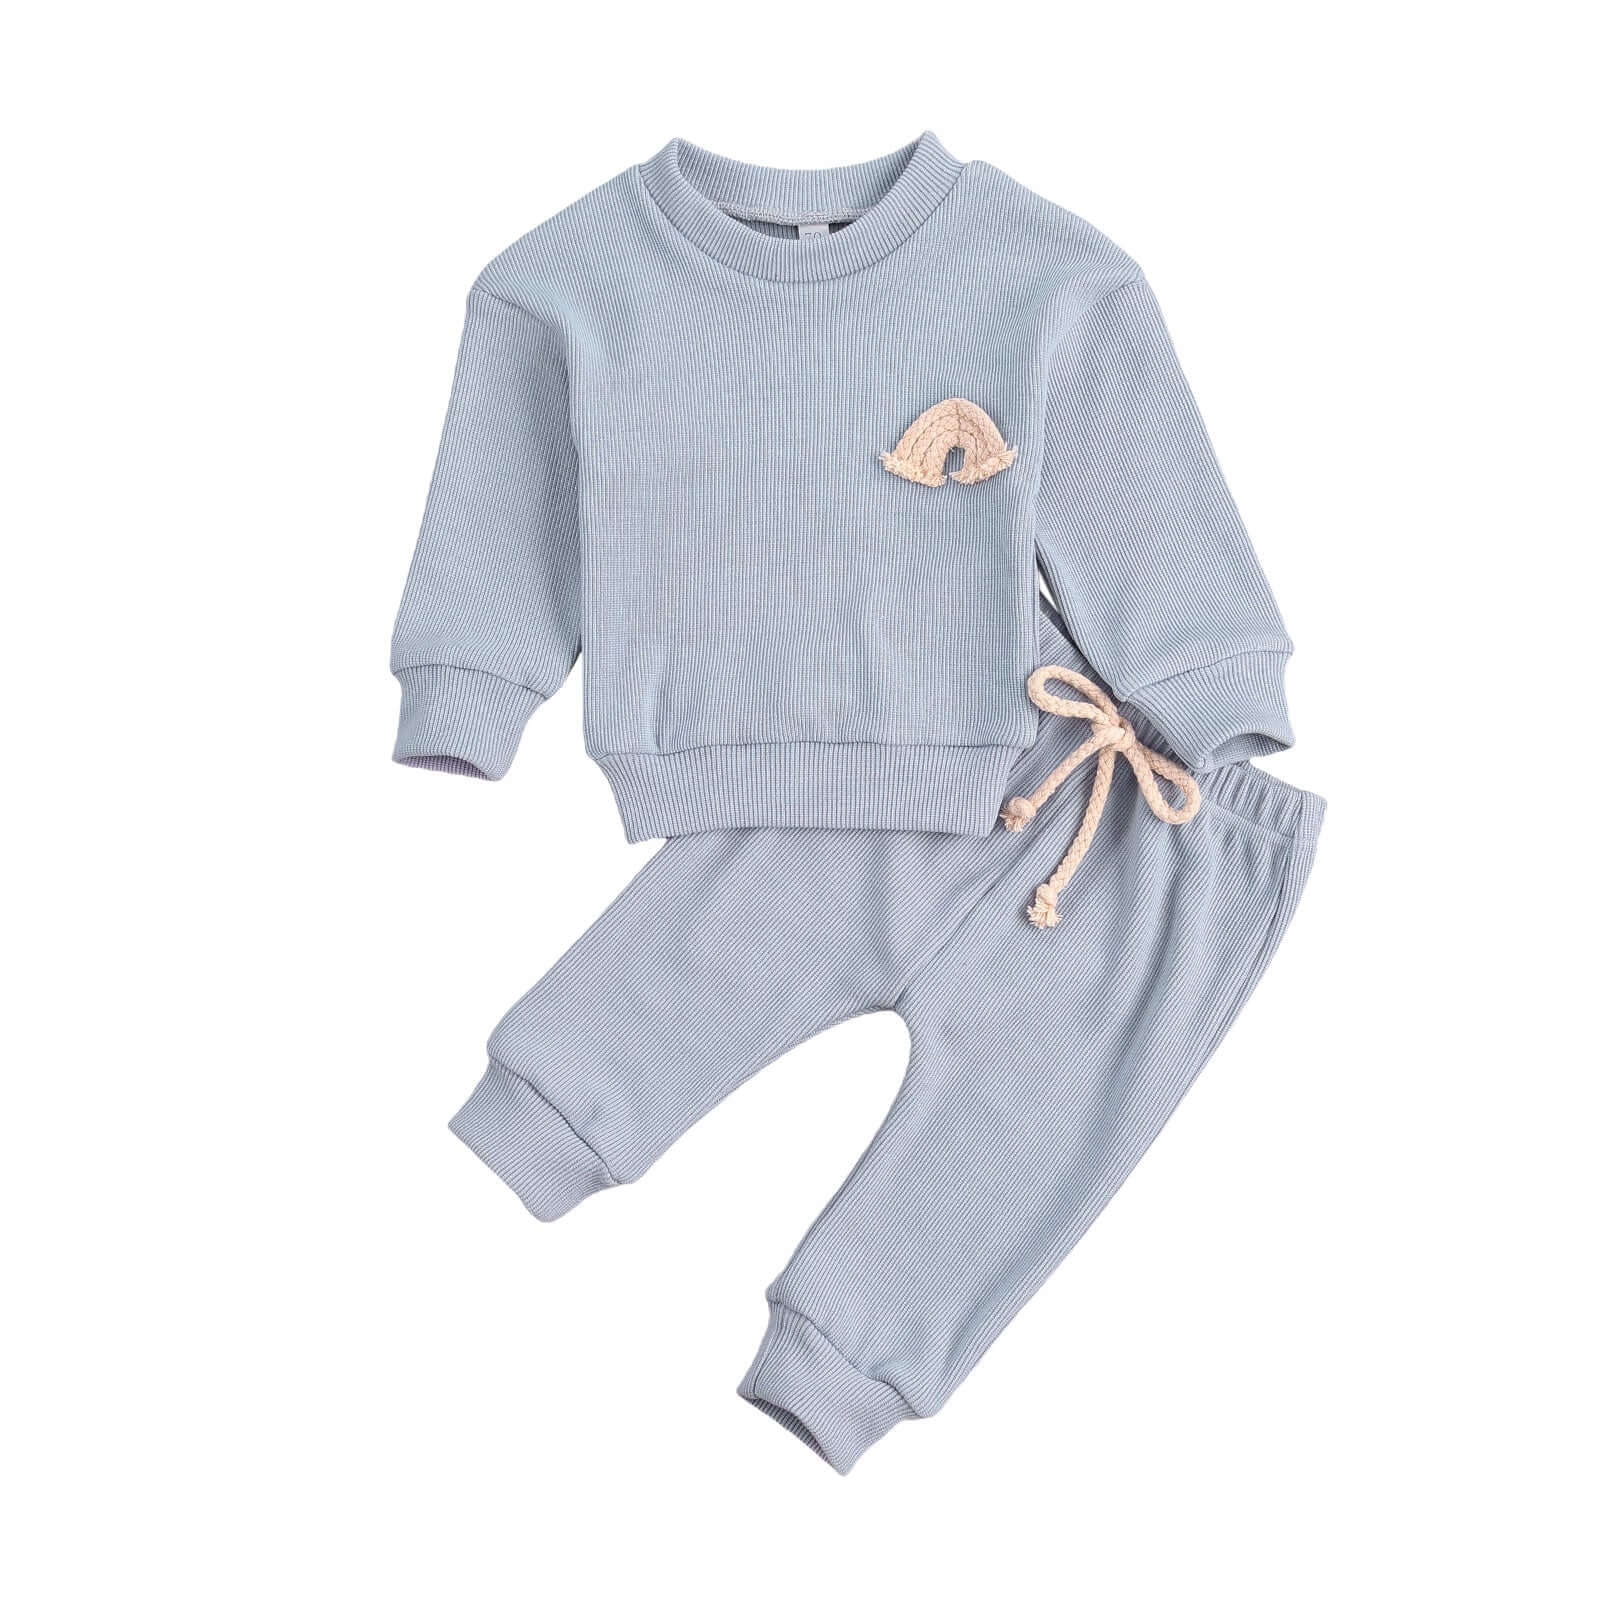 Newborn Baby Solid Clothes